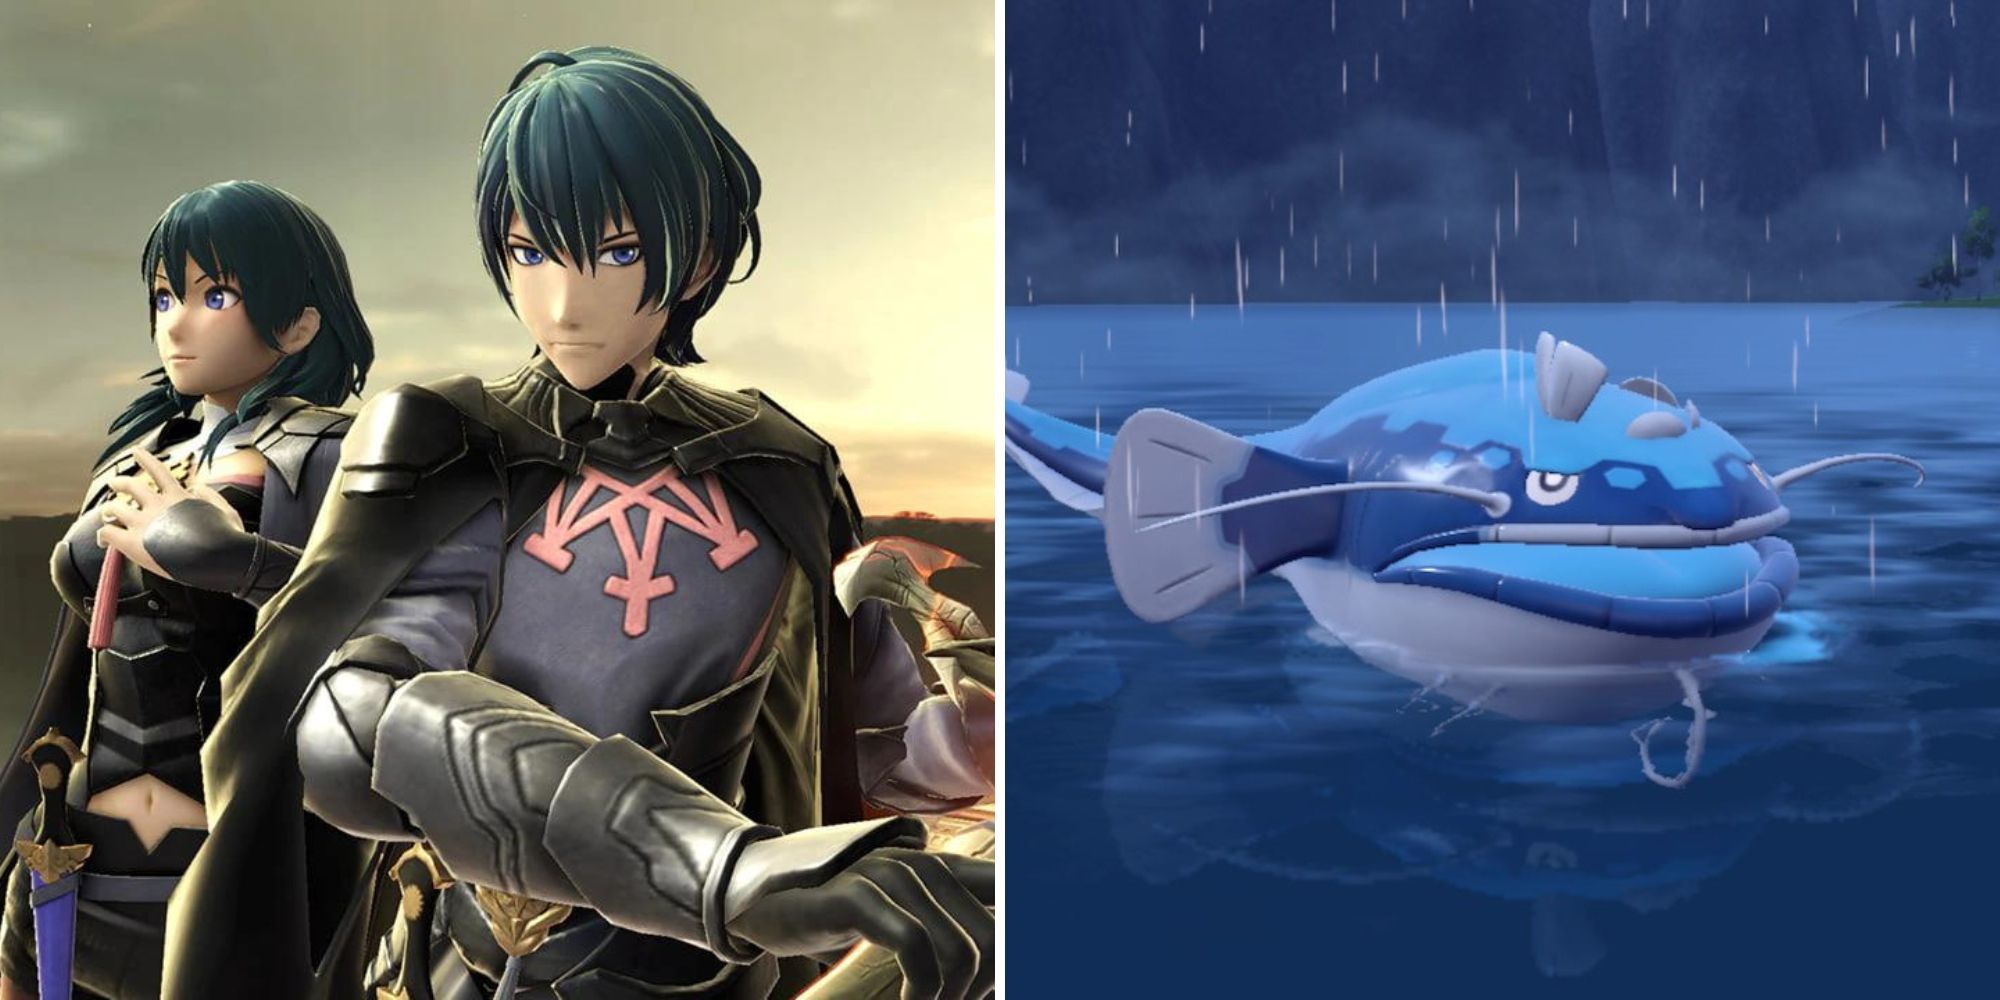 Male and Female Byleth stand together and Dondozo floats in the ocean while it rains